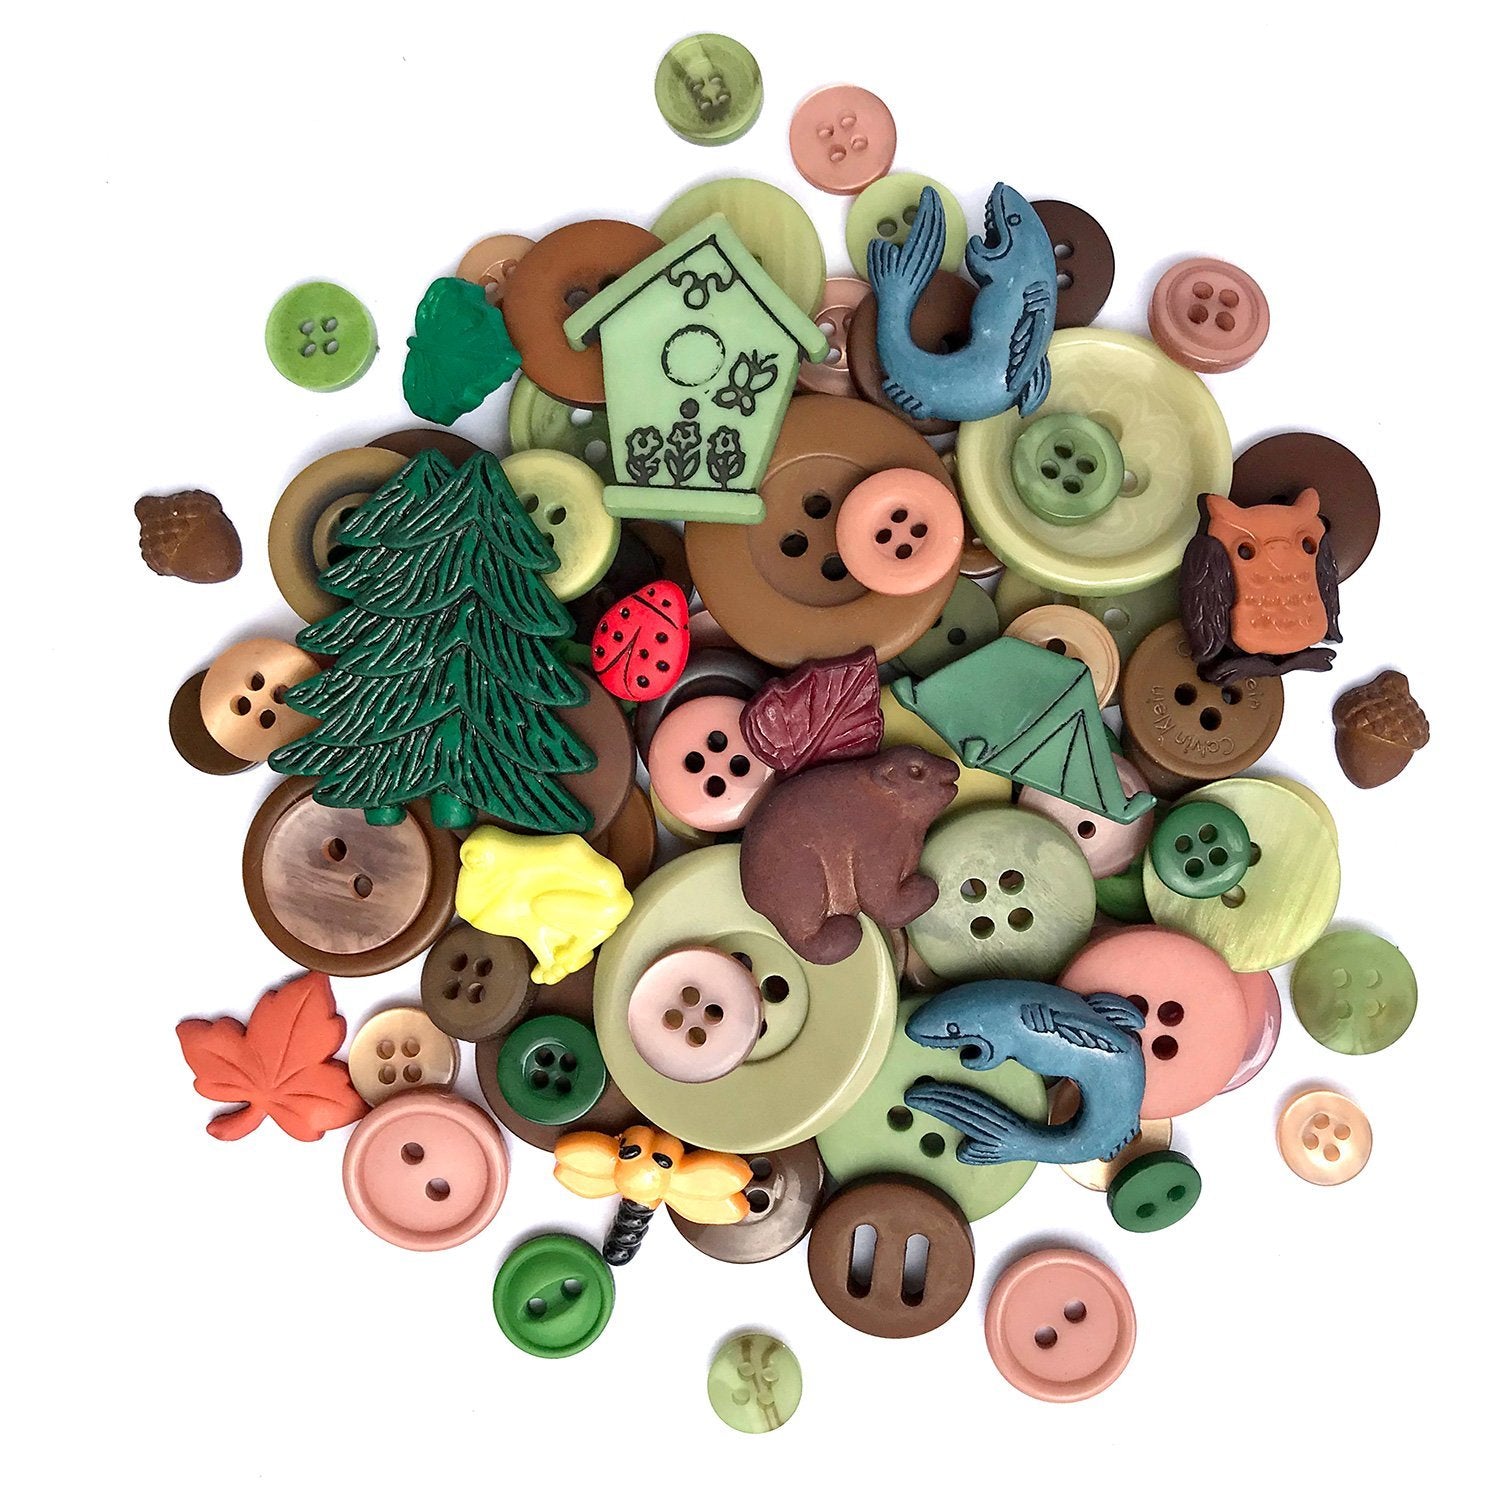 Buttons Galore 50+ Buttons for Sewing & Crafts - Summer Vacation